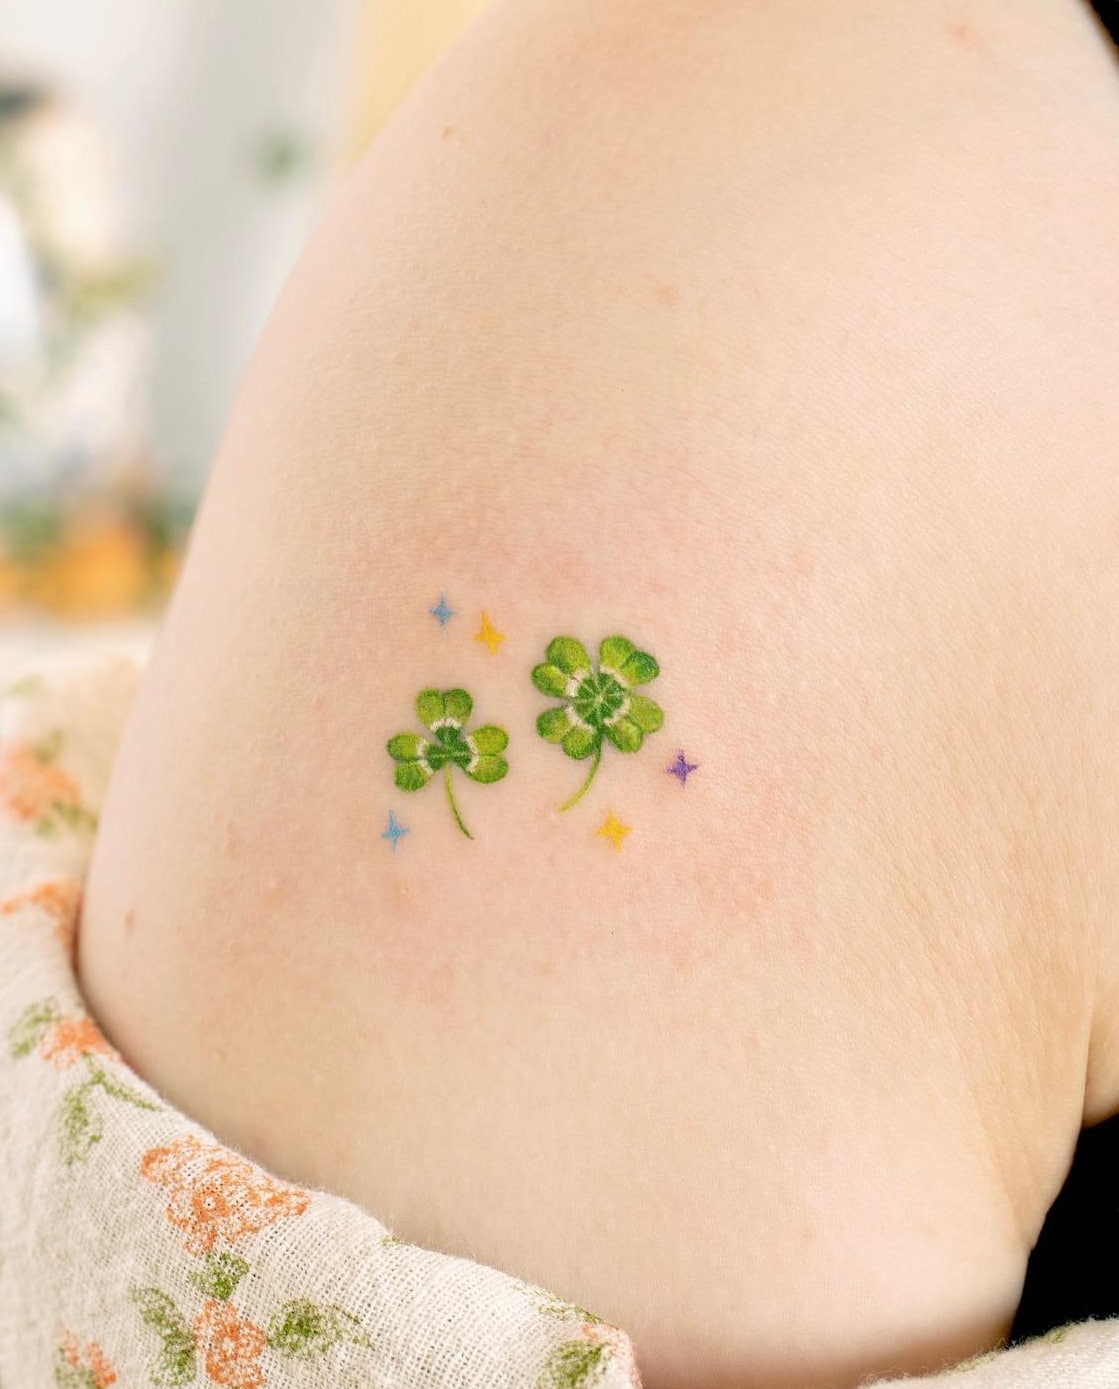 Four-leaf Clover Tattoos: What They Mean & Why They're So Popular